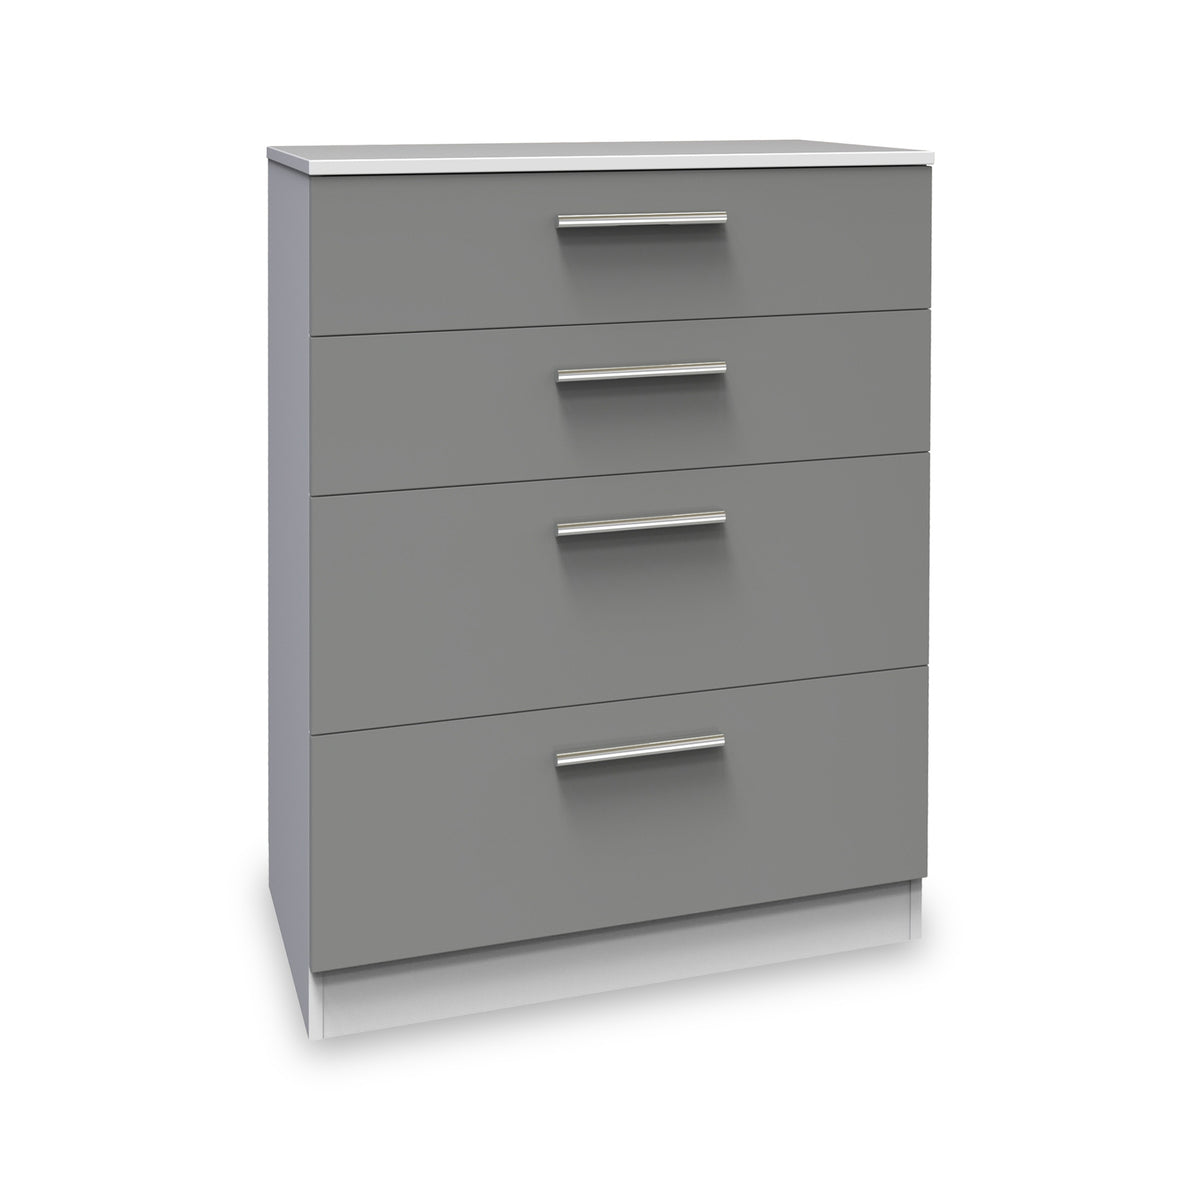 Blakely Grey and White 4 Drawer Deep Chest from Roseland